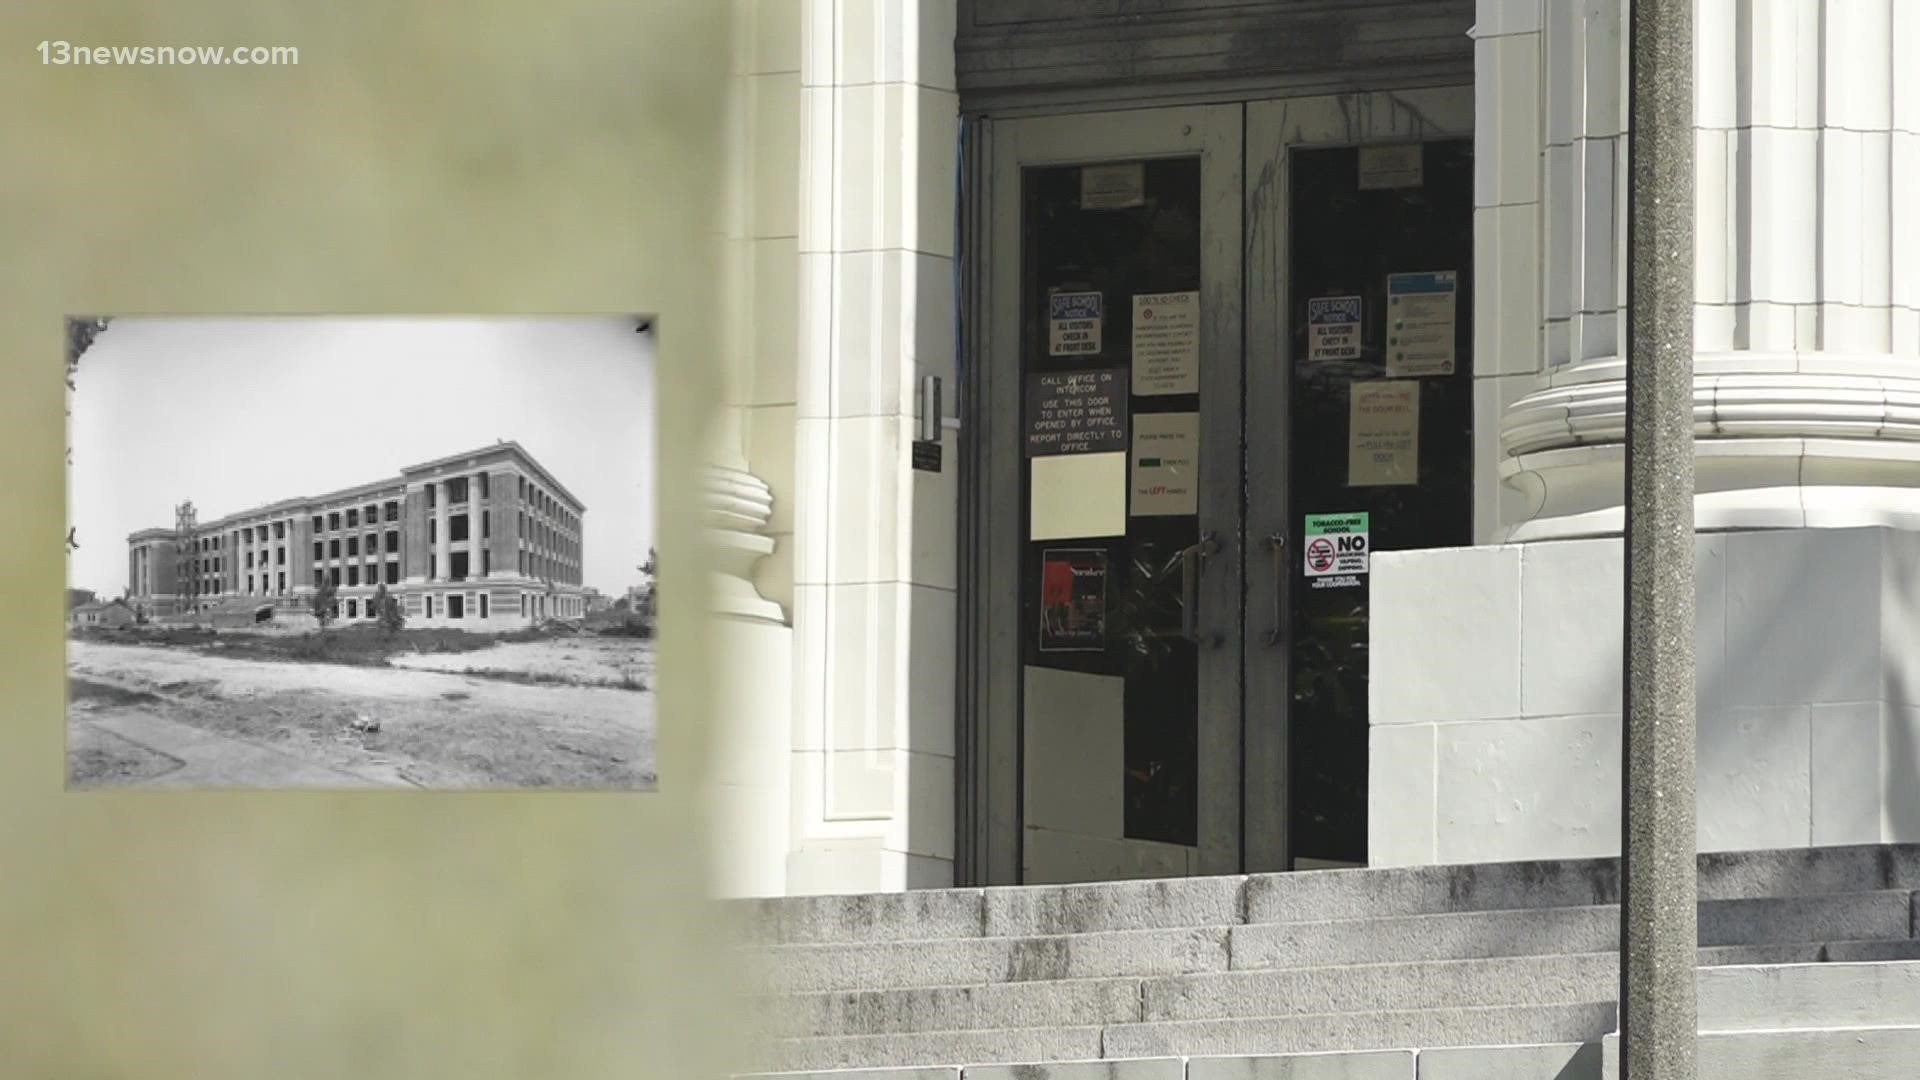 Generations of students have attended the school that was first built in 1910. Now, there are four proposals for how the city can renovate the building.